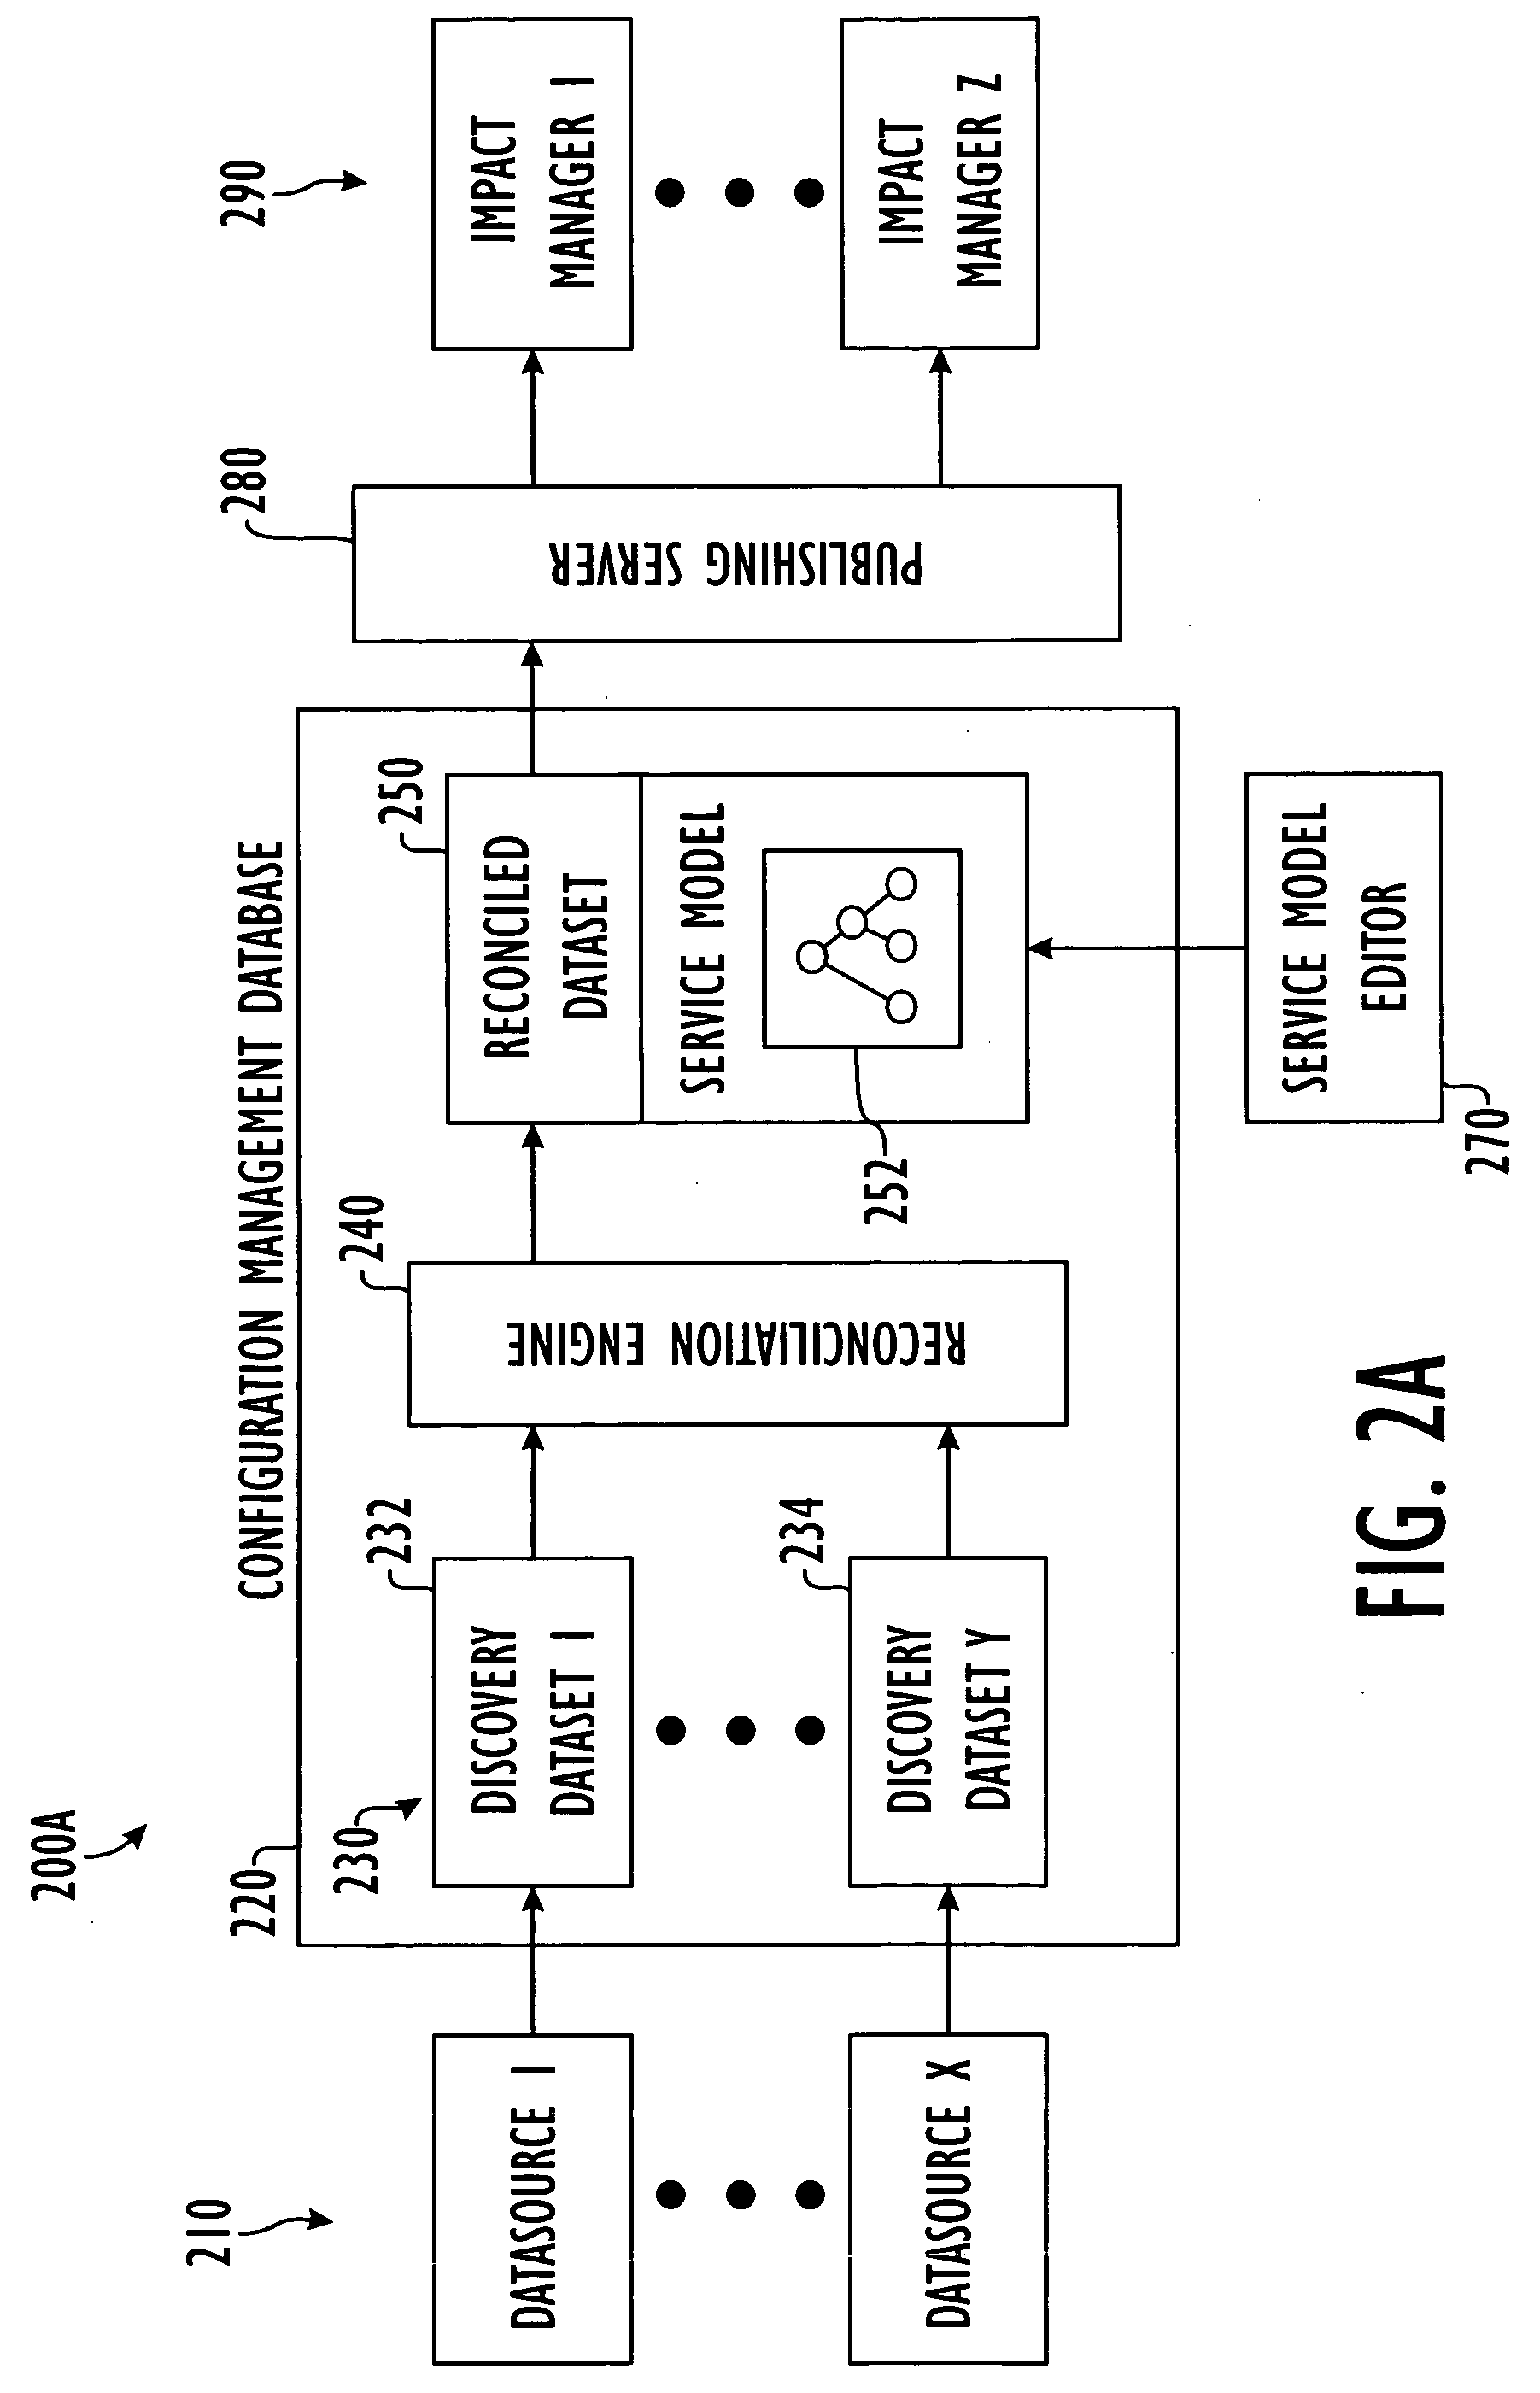 System and method for business service management